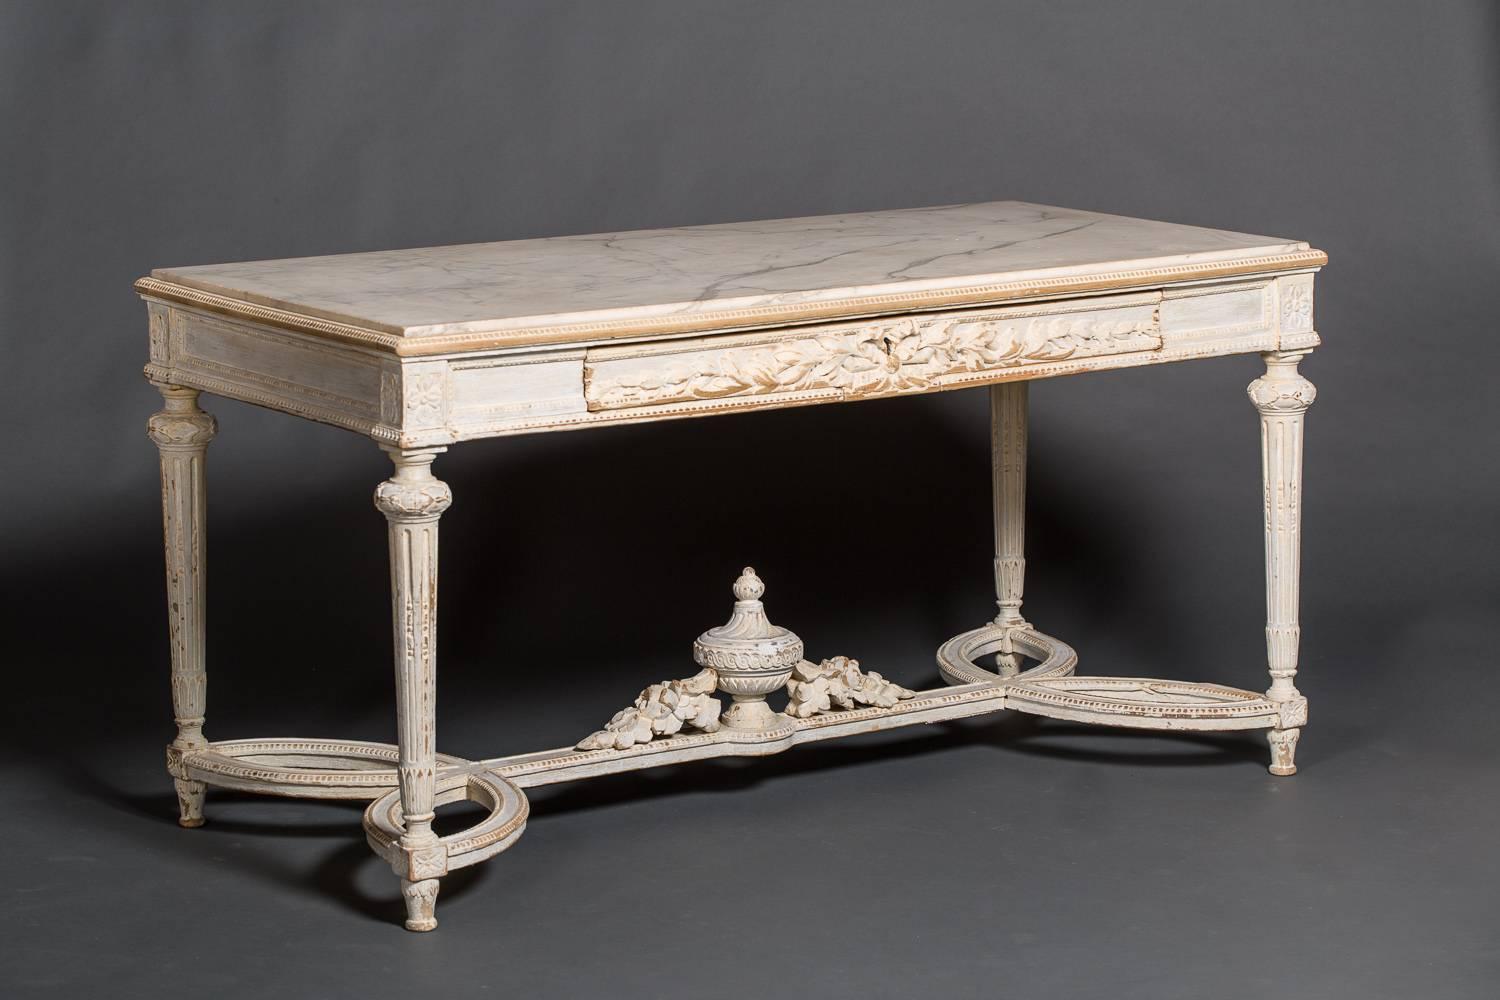 French marble and wood center table.
Louis XVI style.